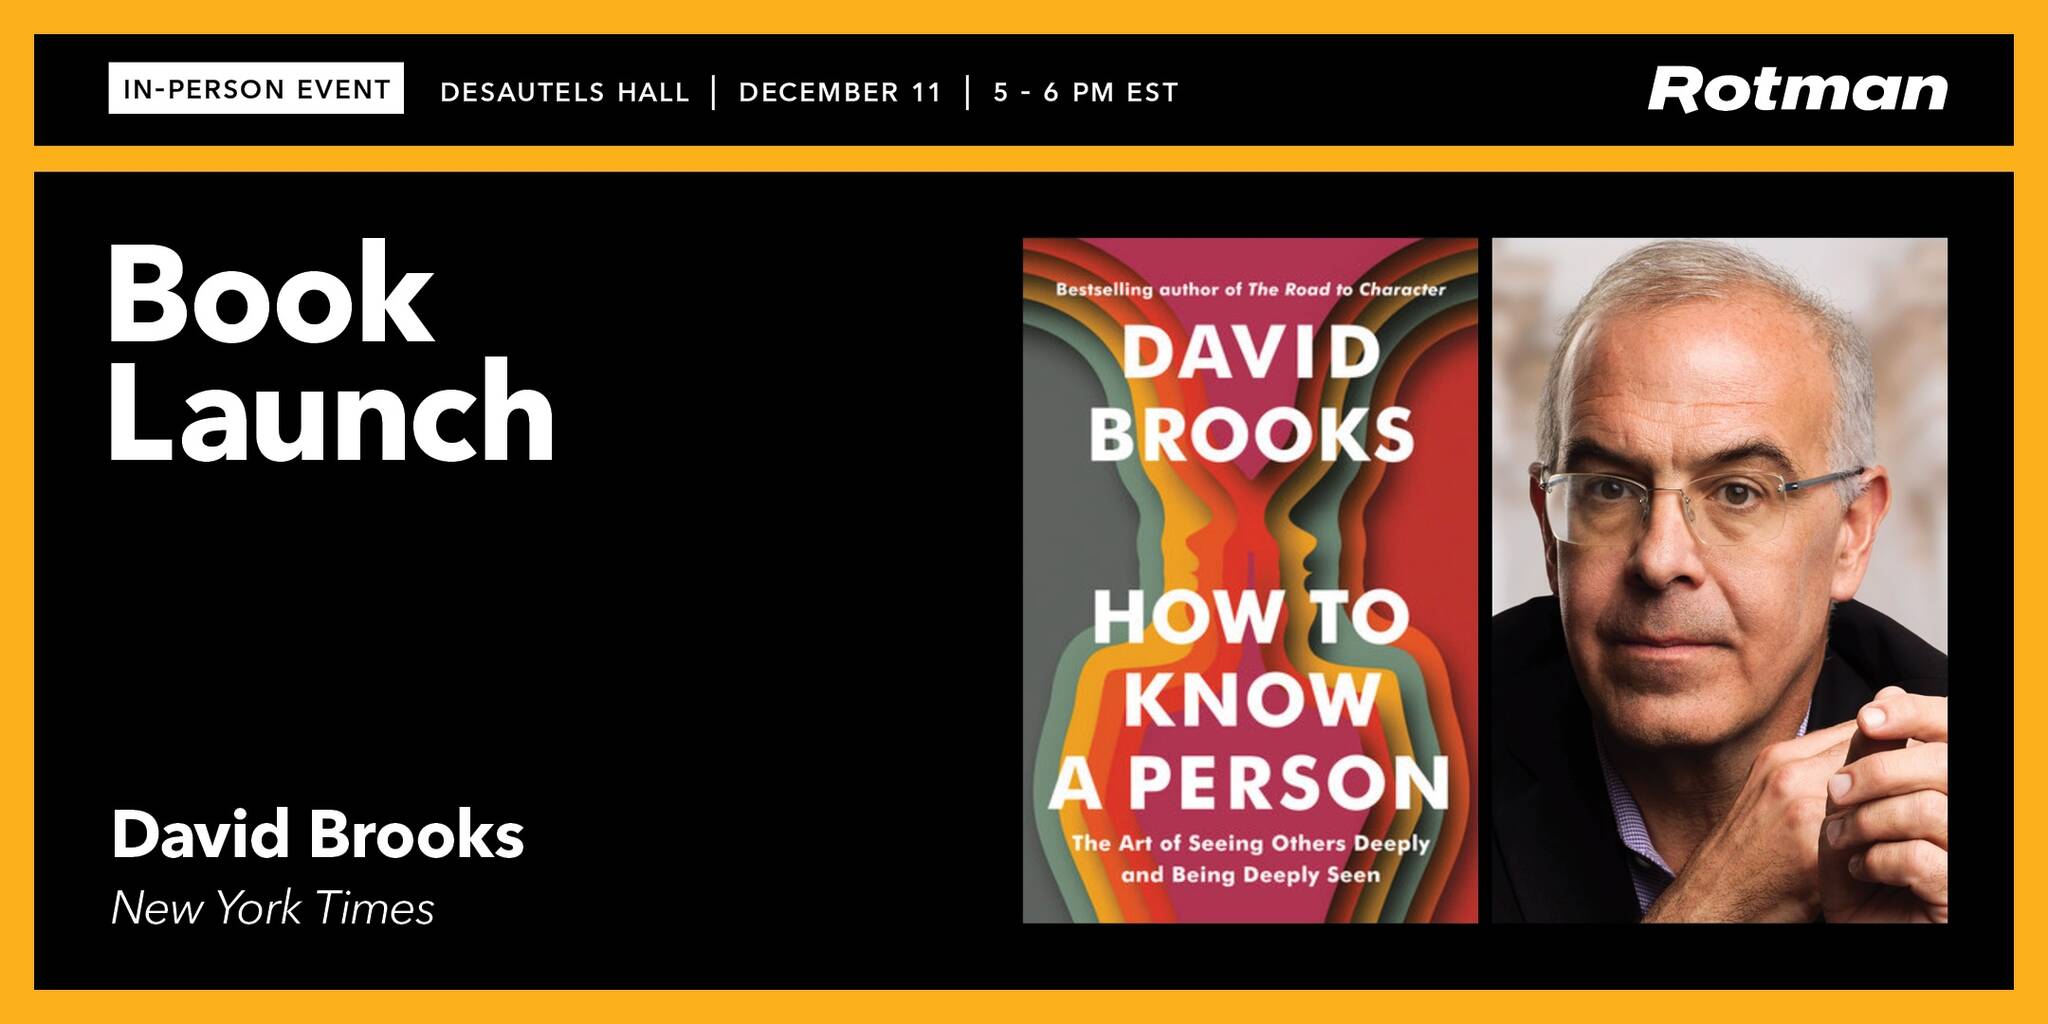 NY Times' David Brooks on 'How to Know a Person'